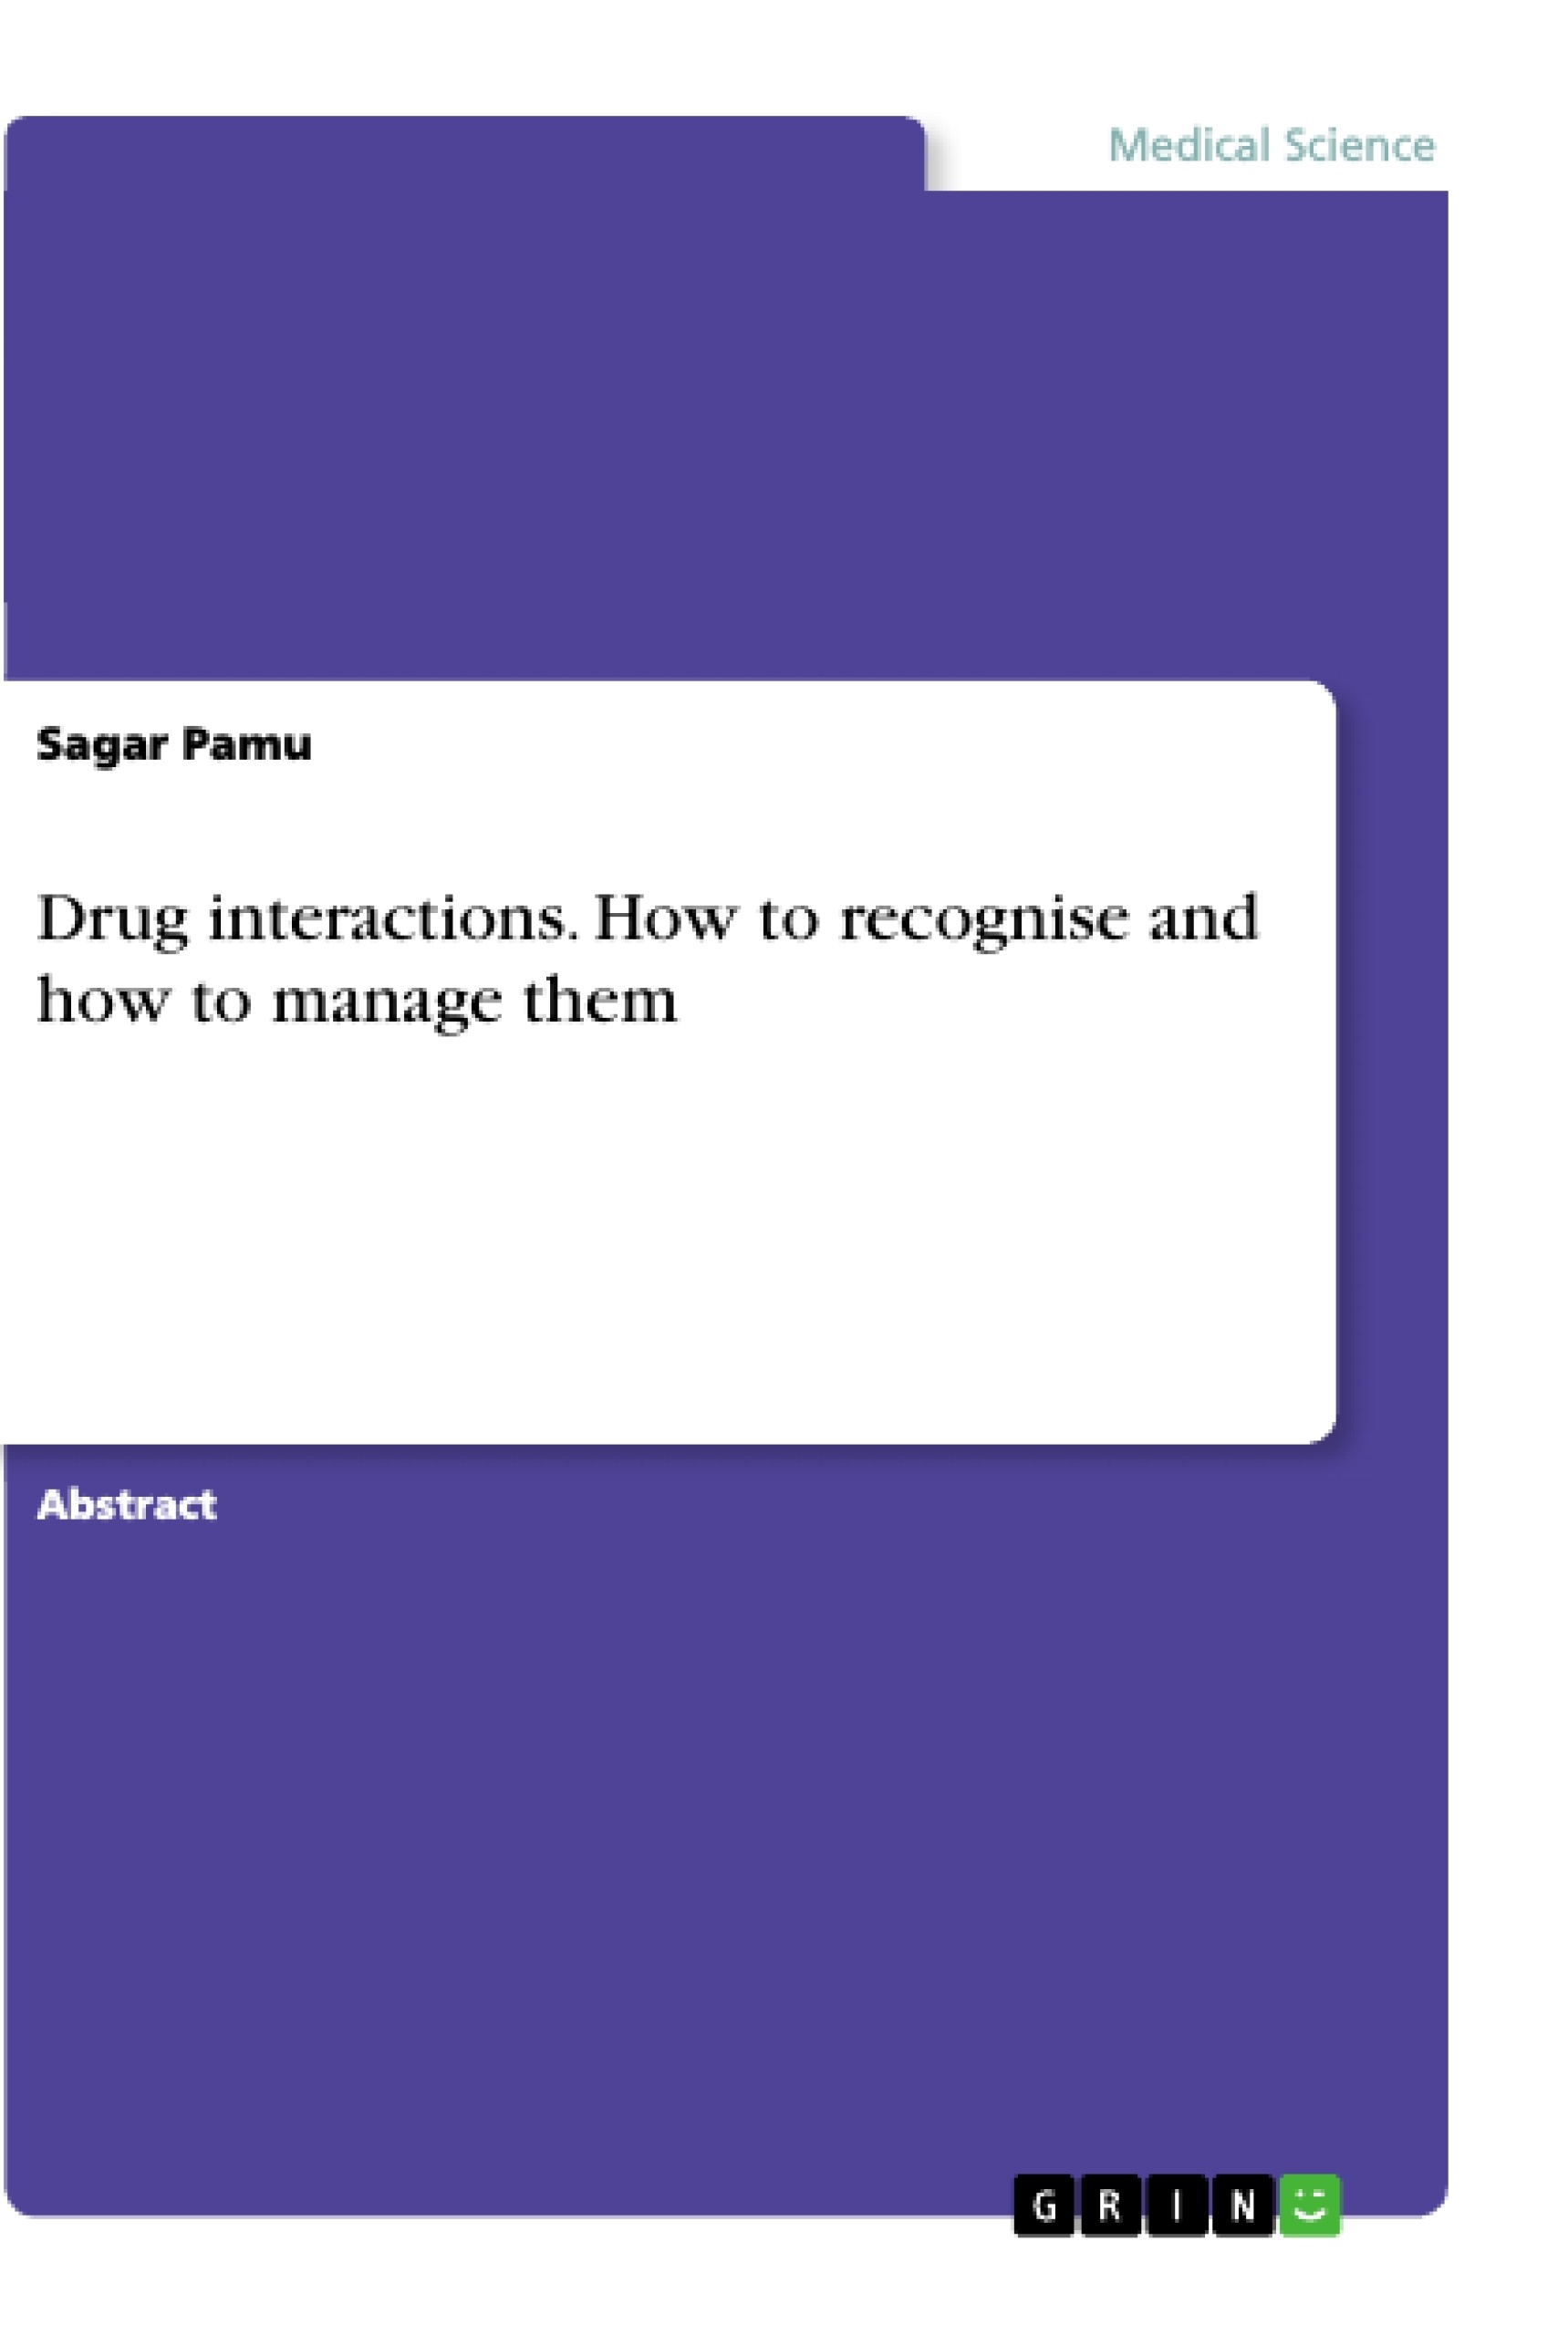 Título: Drug interactions. How to recognise and how to manage them